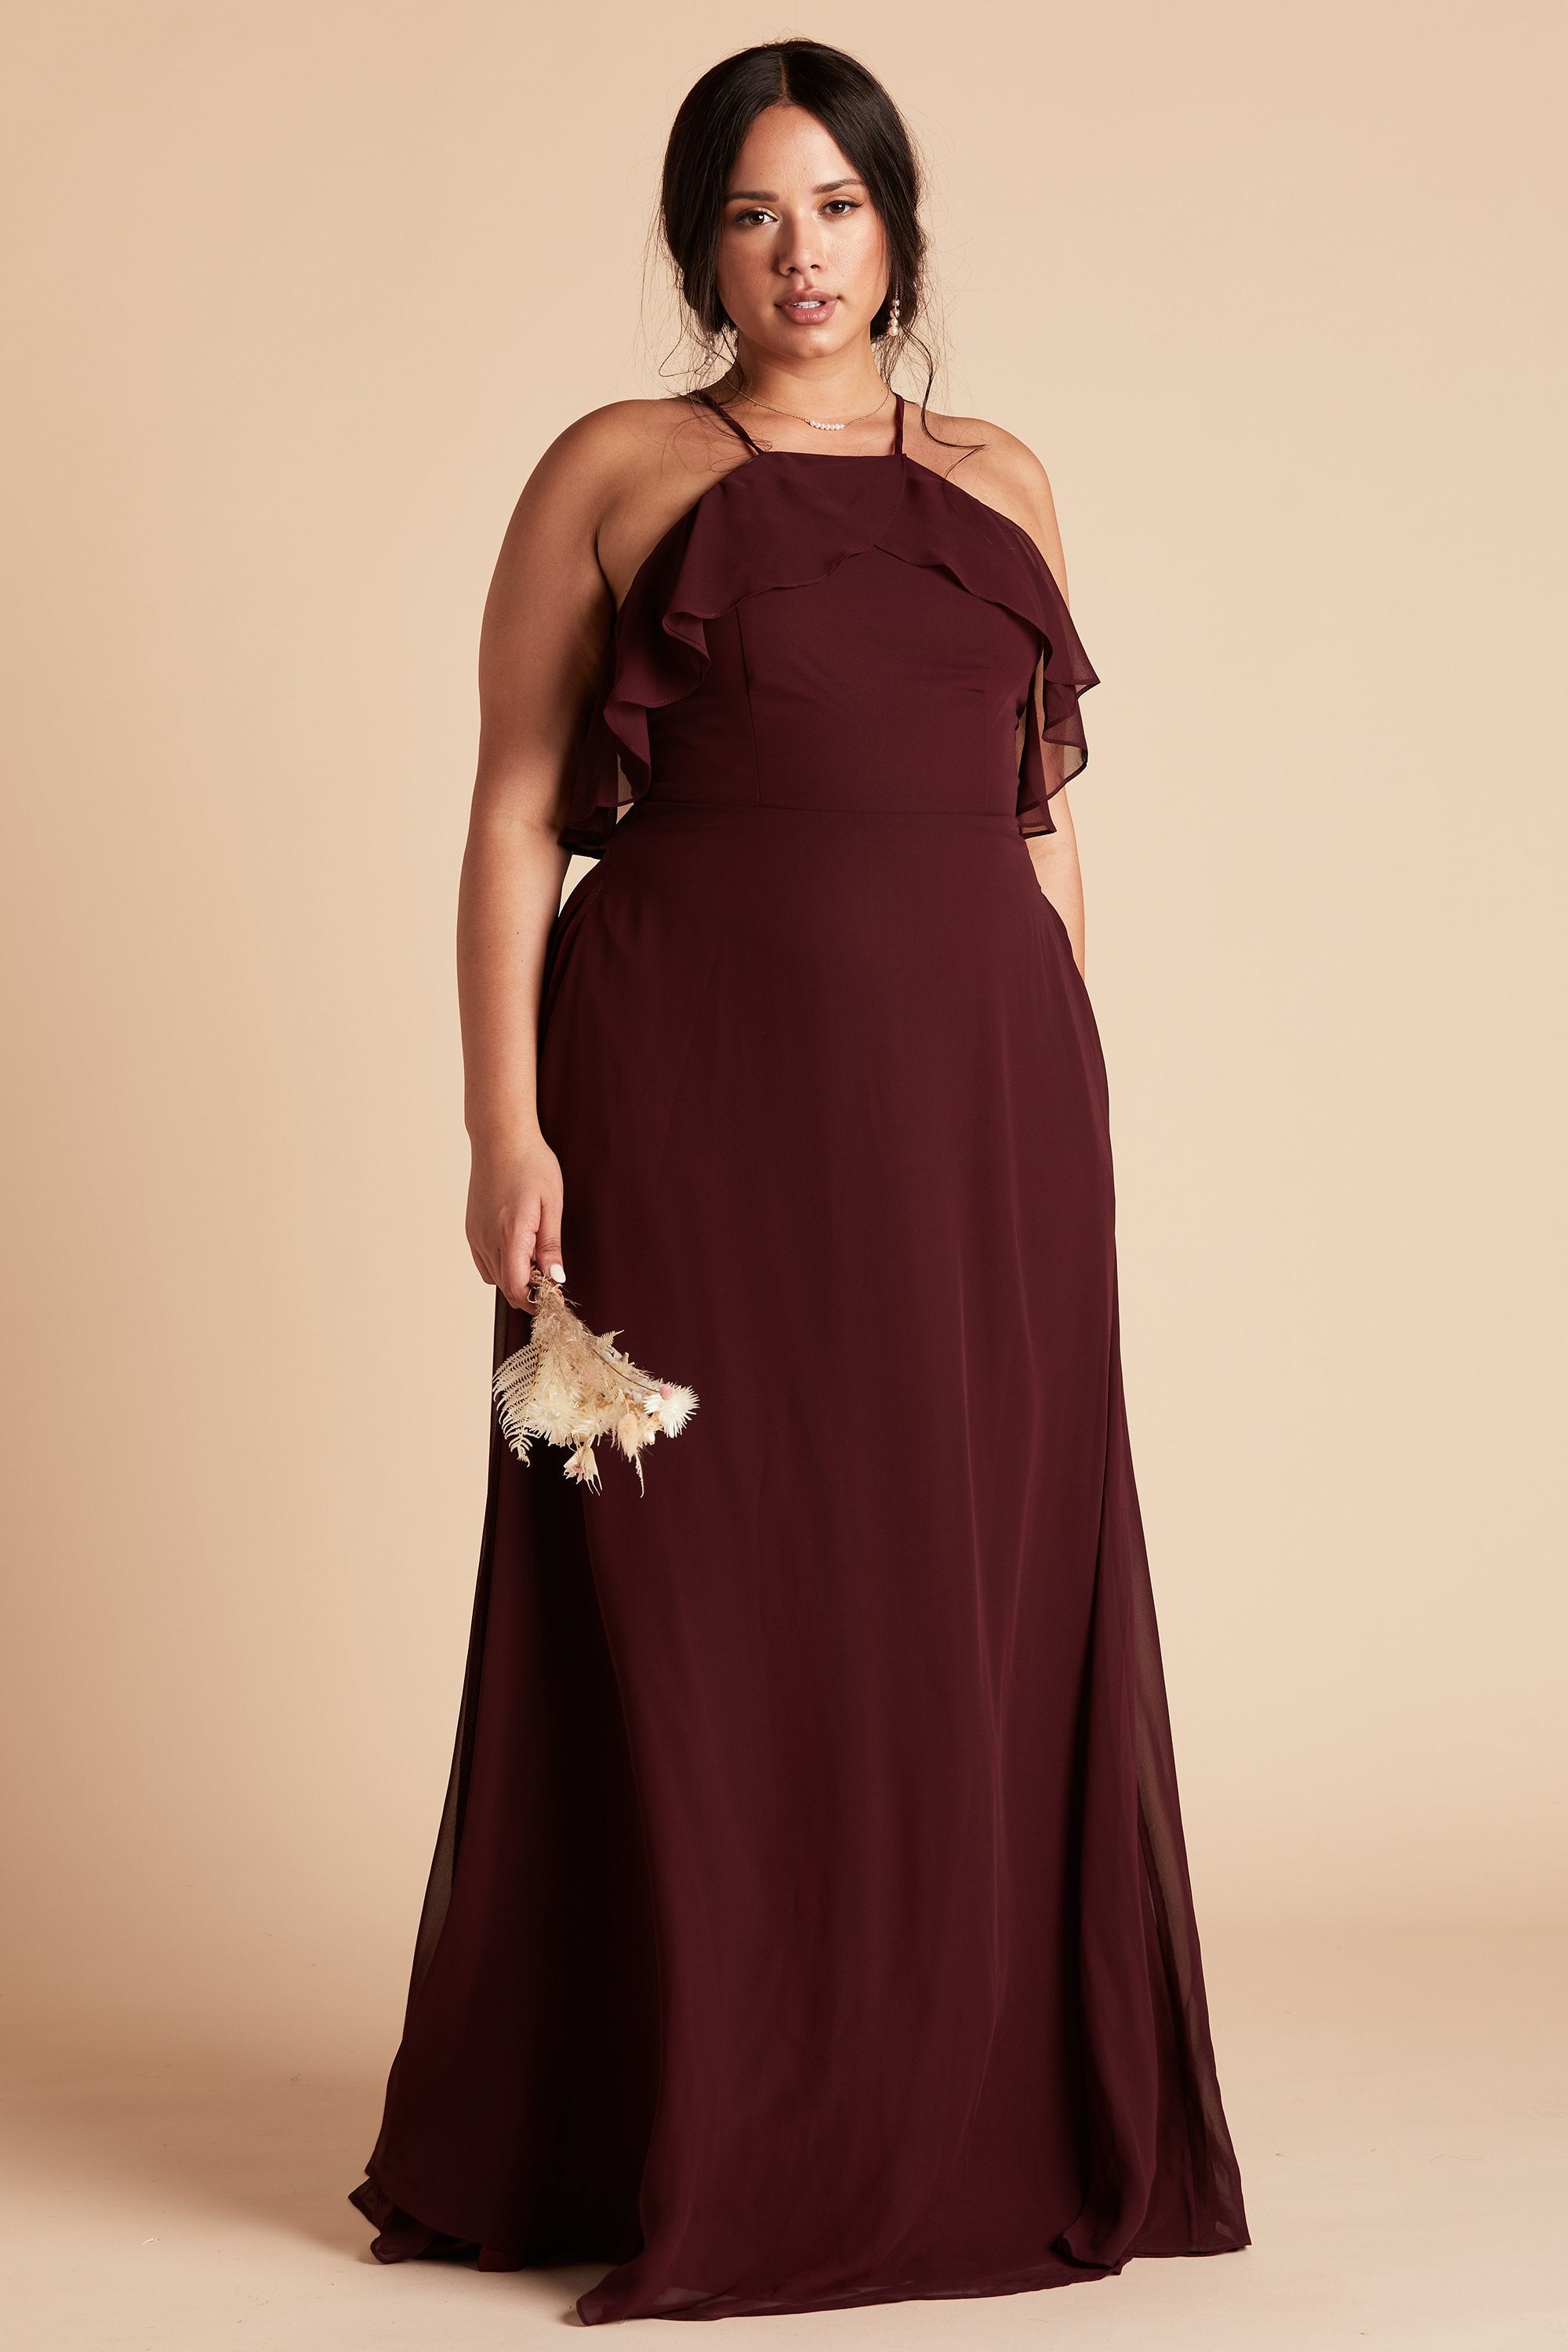 Jules plus size bridesmaid dress in cabernet burgundy chiffon by Birdy Grey, front view